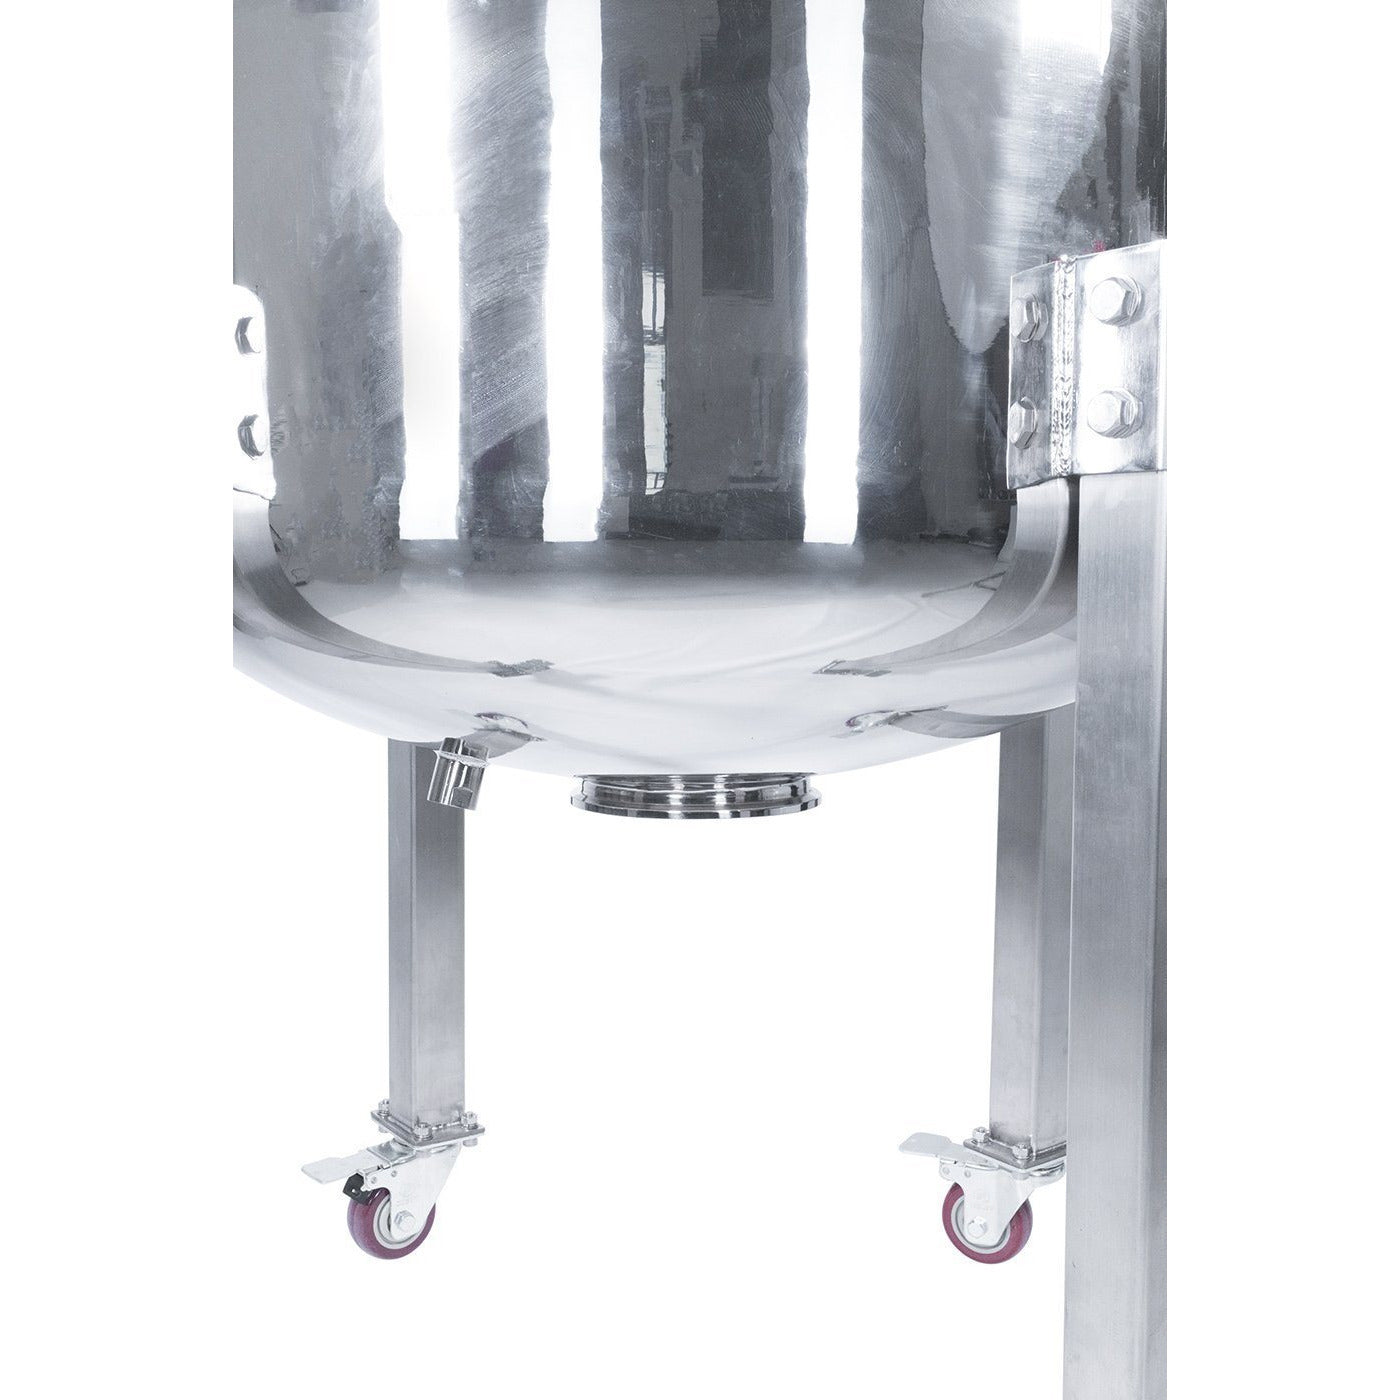 300L 304SS Jacketed Collection and Storage Vessel with Locking Casters Shop All Categories BVV 